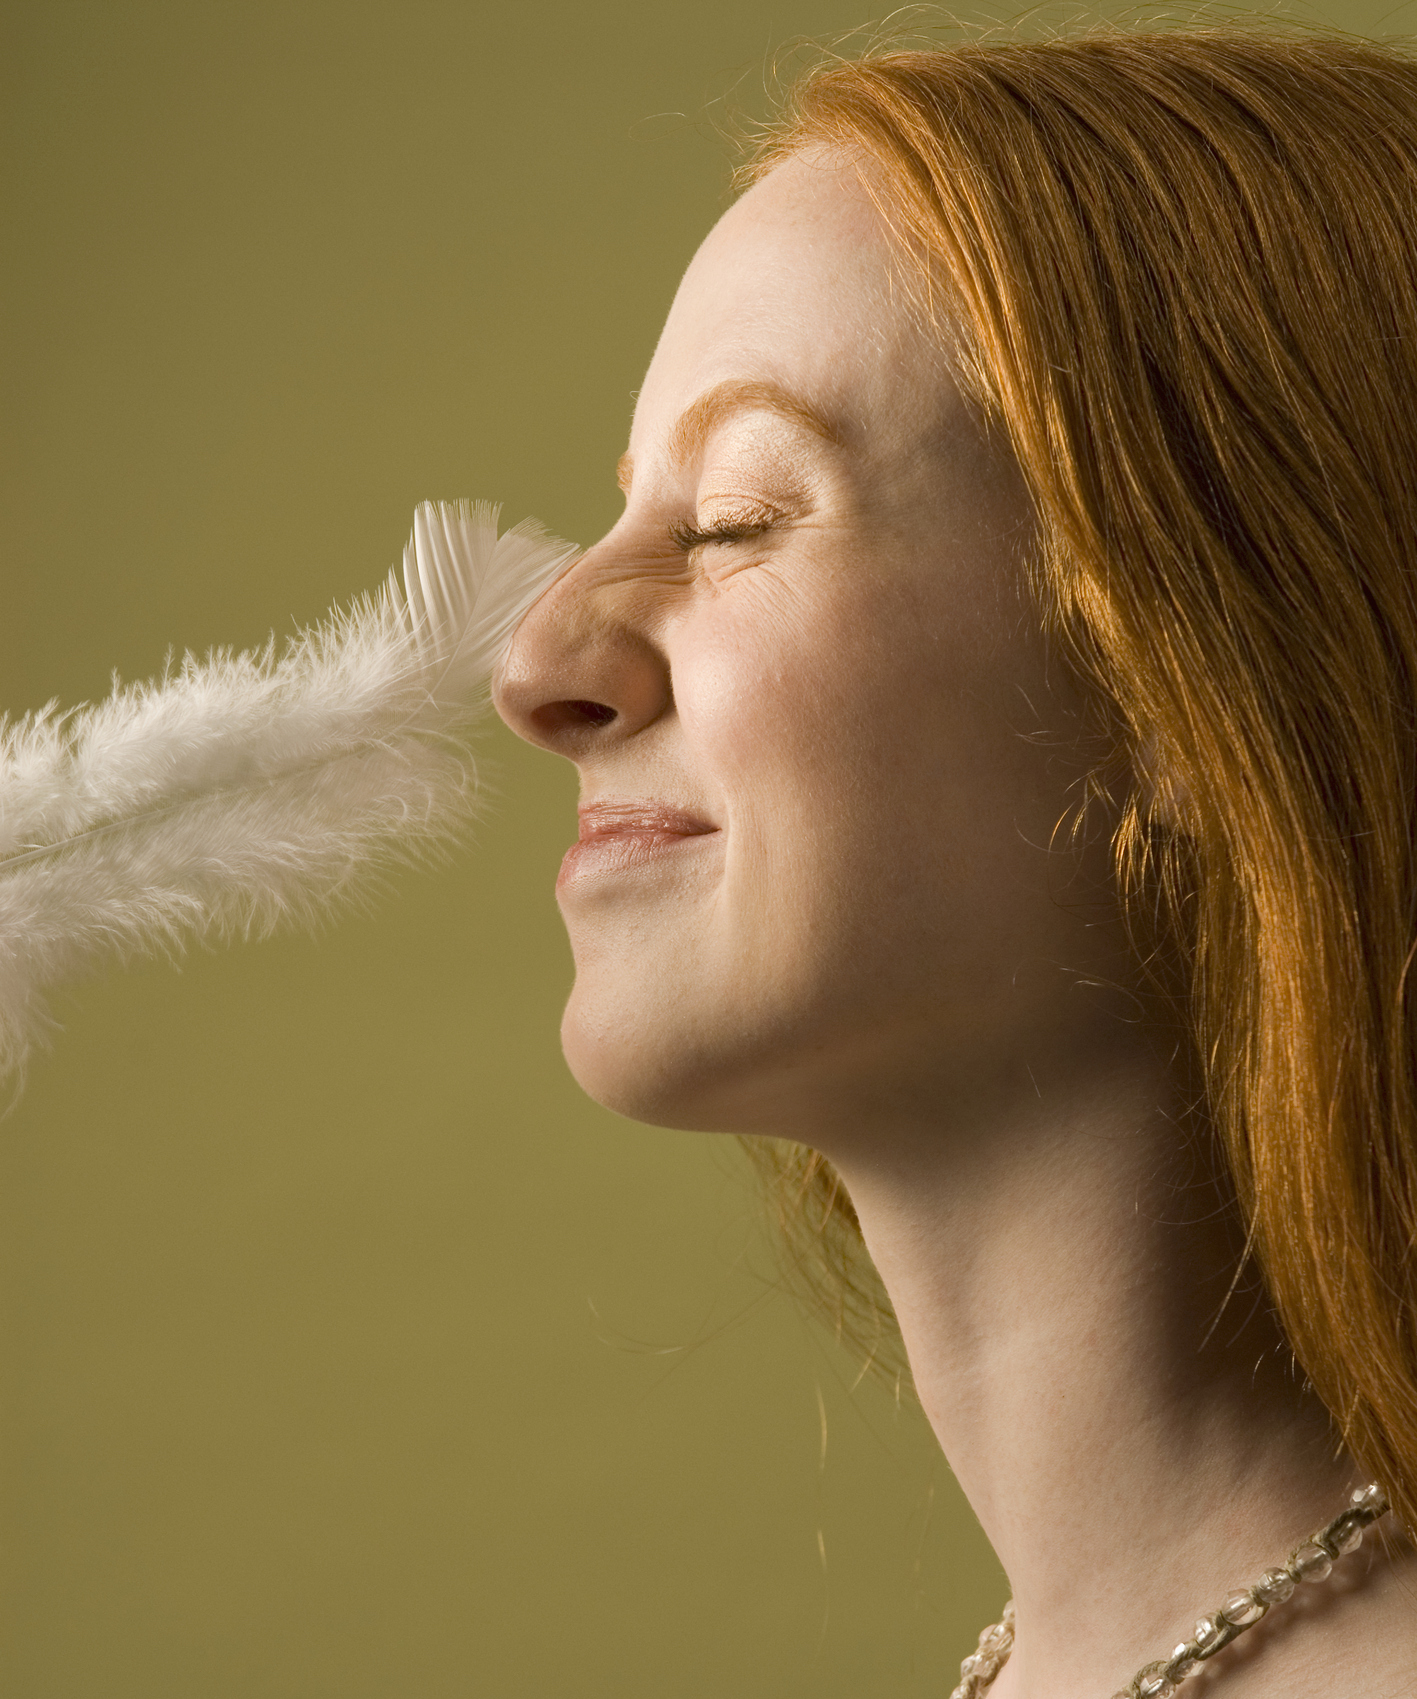 Young woman with nose being tickled by feather, profile